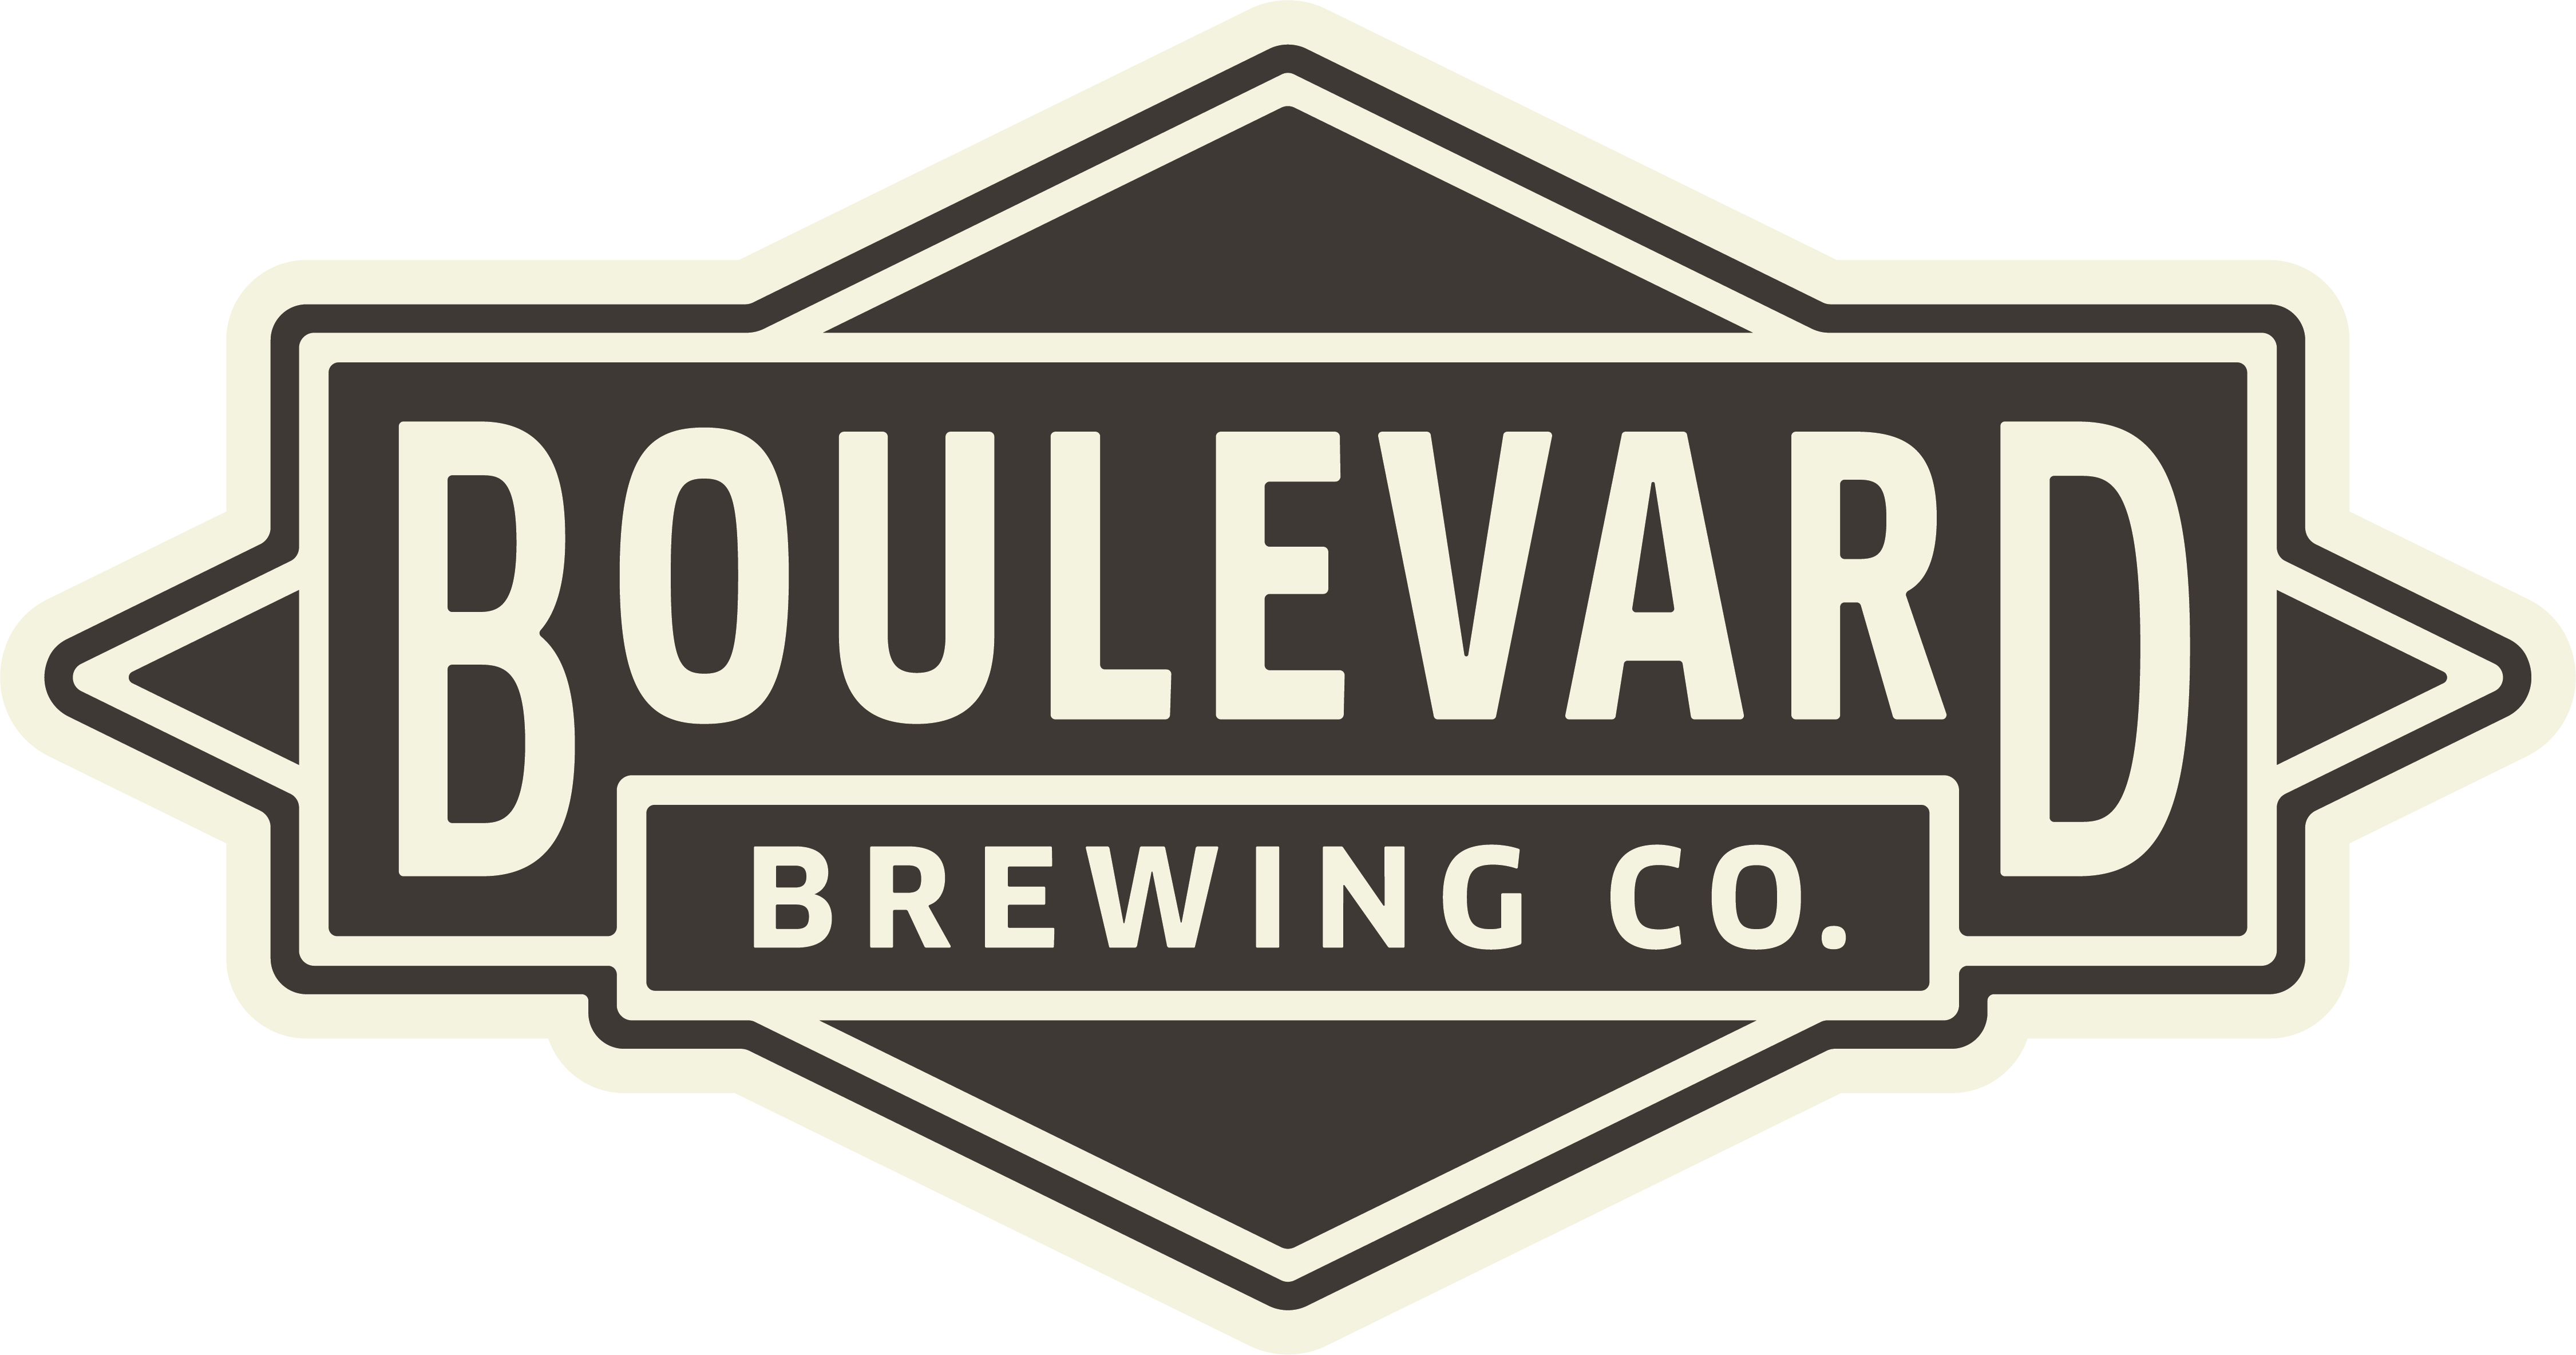 Here for the Beer Tube Socks – Boulevard Brewing Co